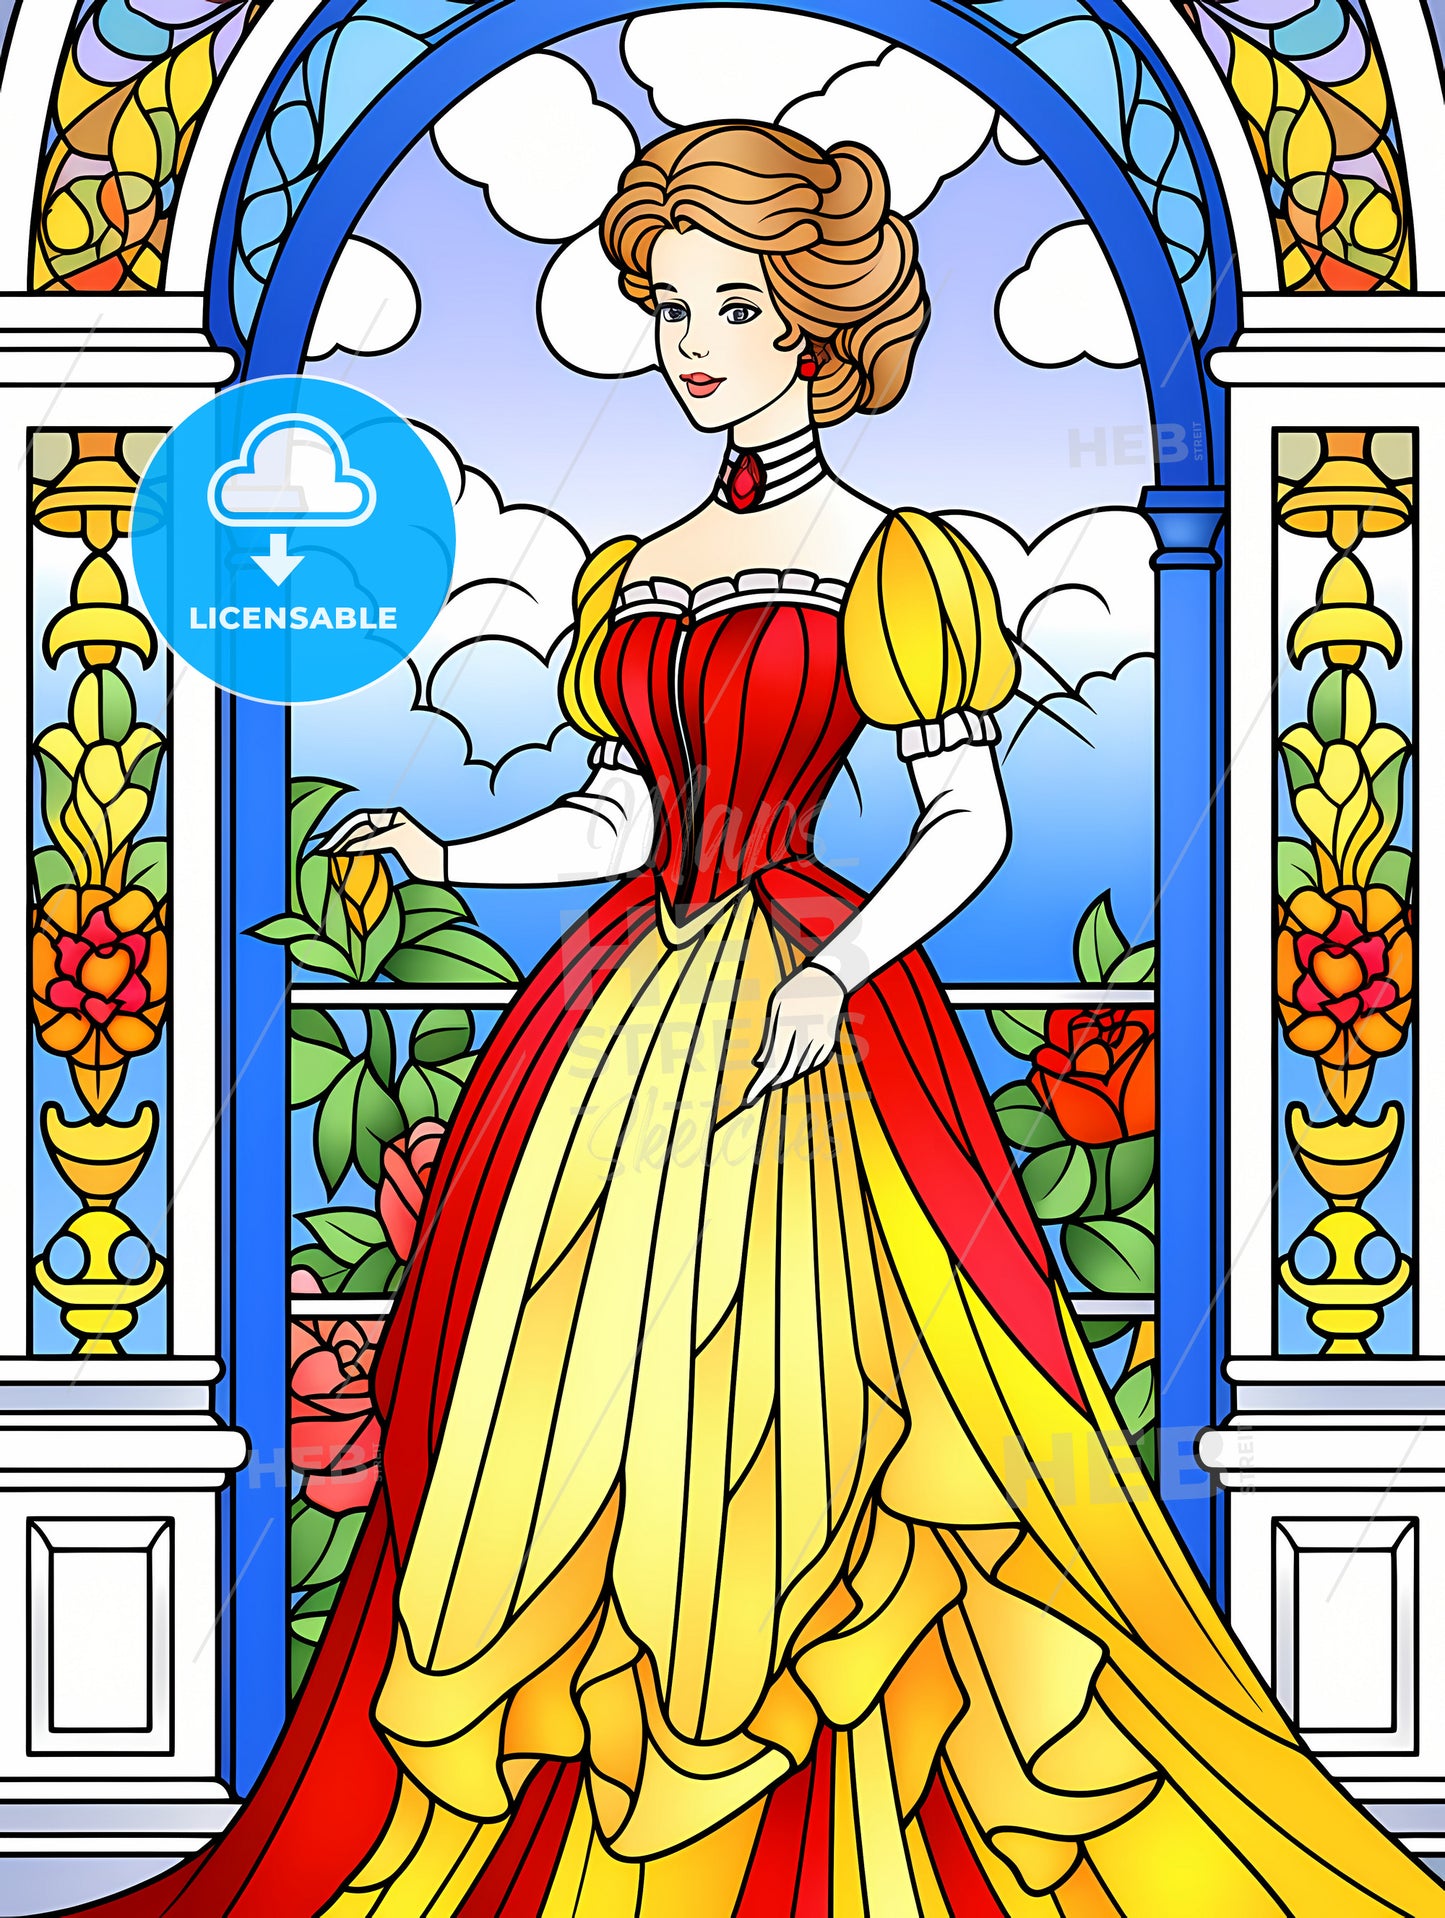 Elegant Victorian Woman, A Stained Glass Window With A Woman In A Dress